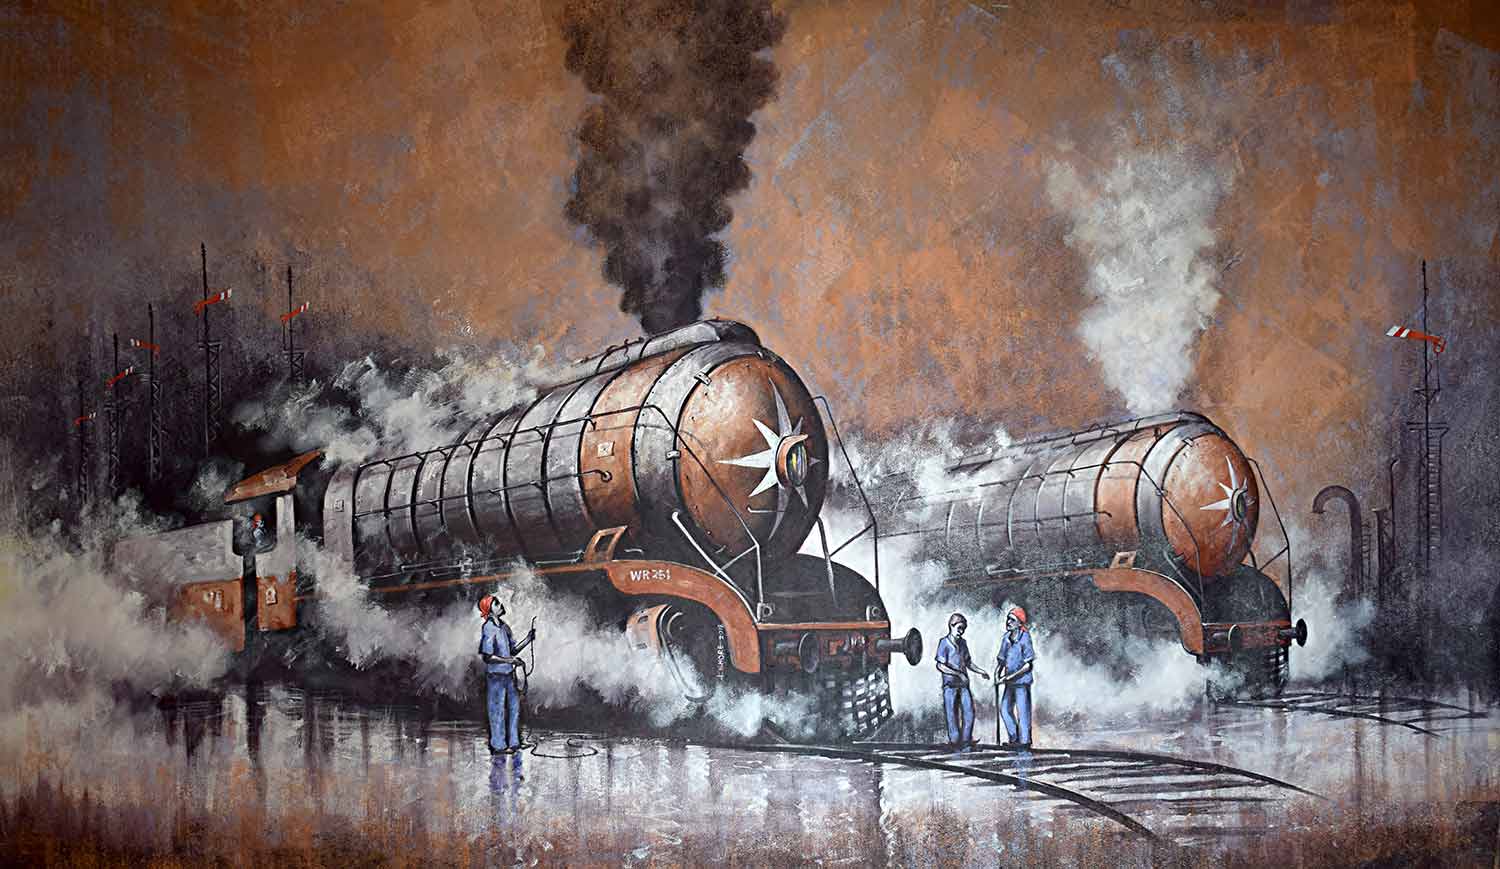 Figurative Painting with Acrylic on Canvas "Locomotives-41" art by Kishore Pratim Biswas